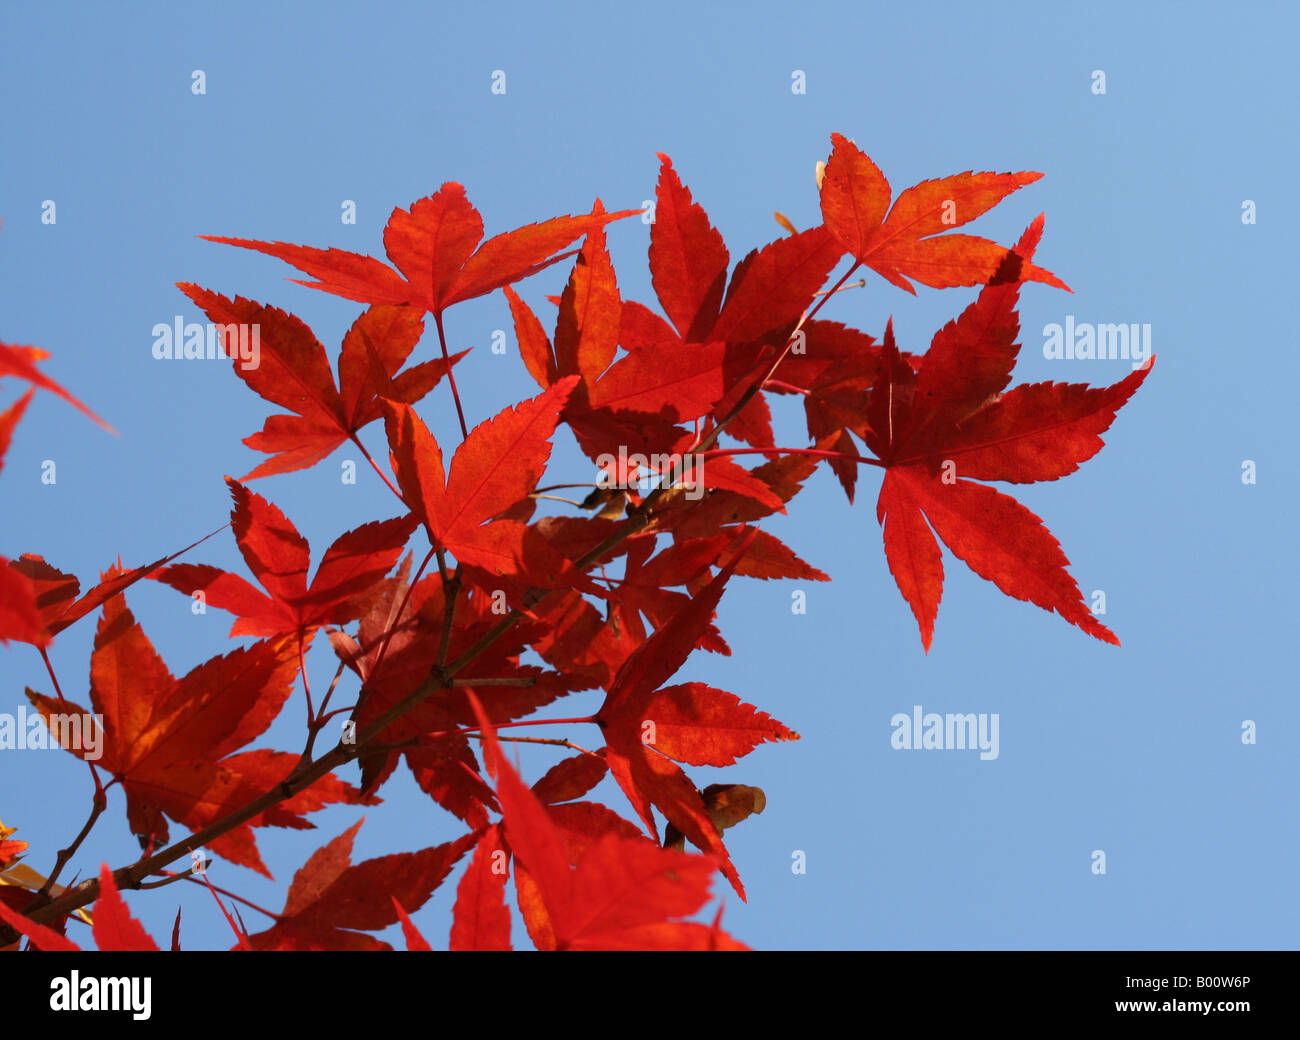 Red leaves of a Japanese maple (Acer palmatum) against a blue sky. Stock Photo